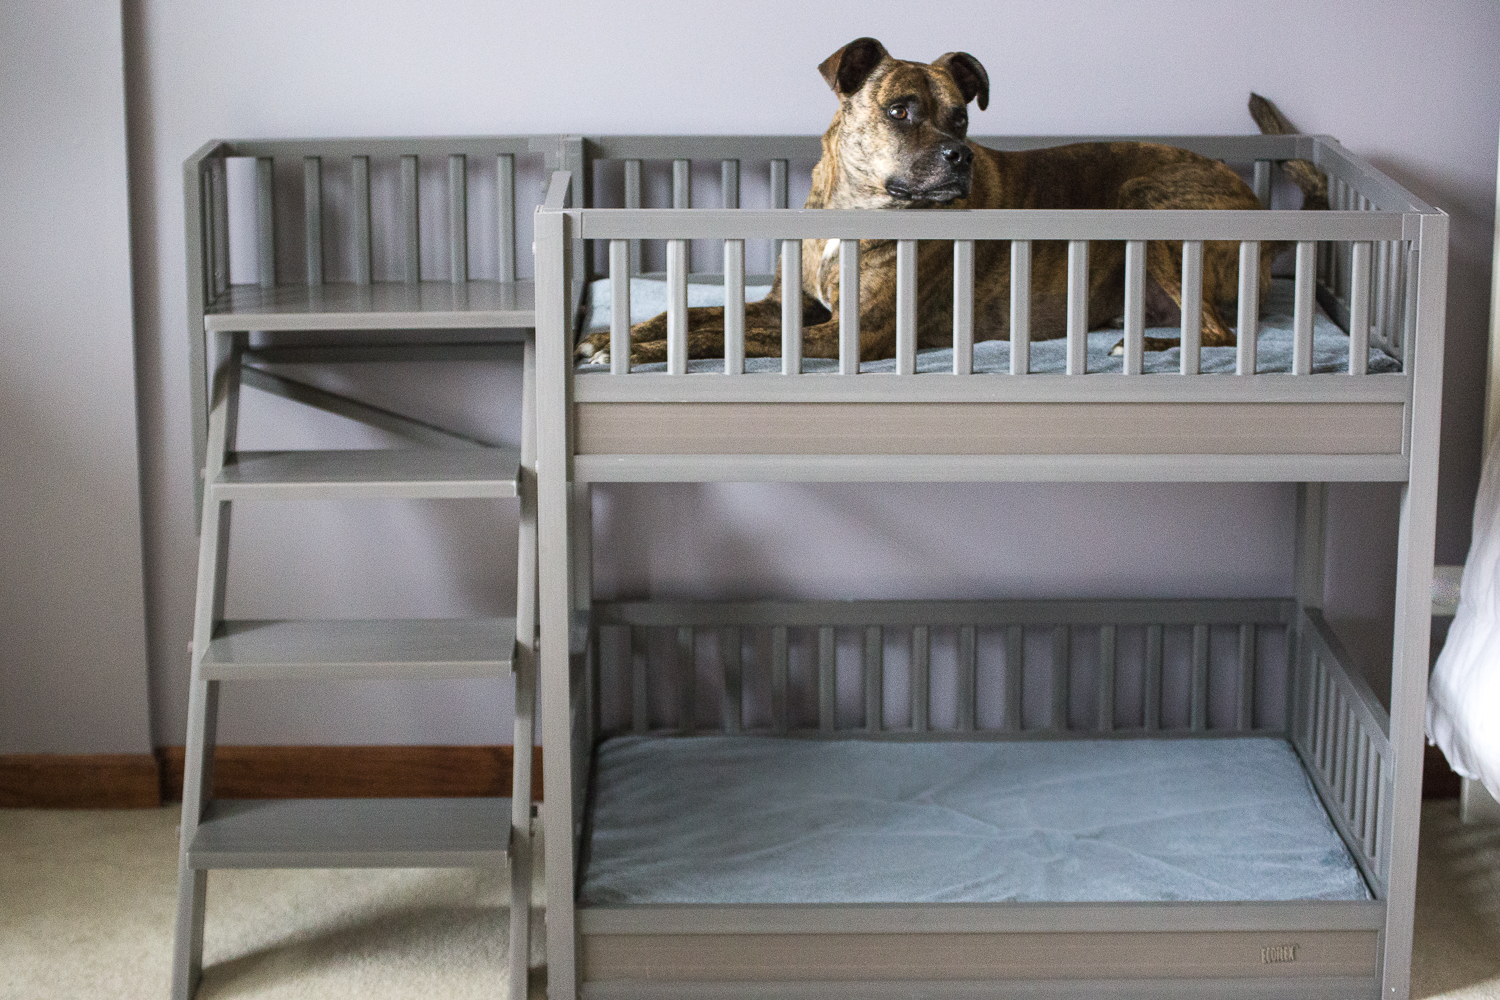 Ladder-bed. +80 Adorable Dog Bed Designs That Will Surprise You